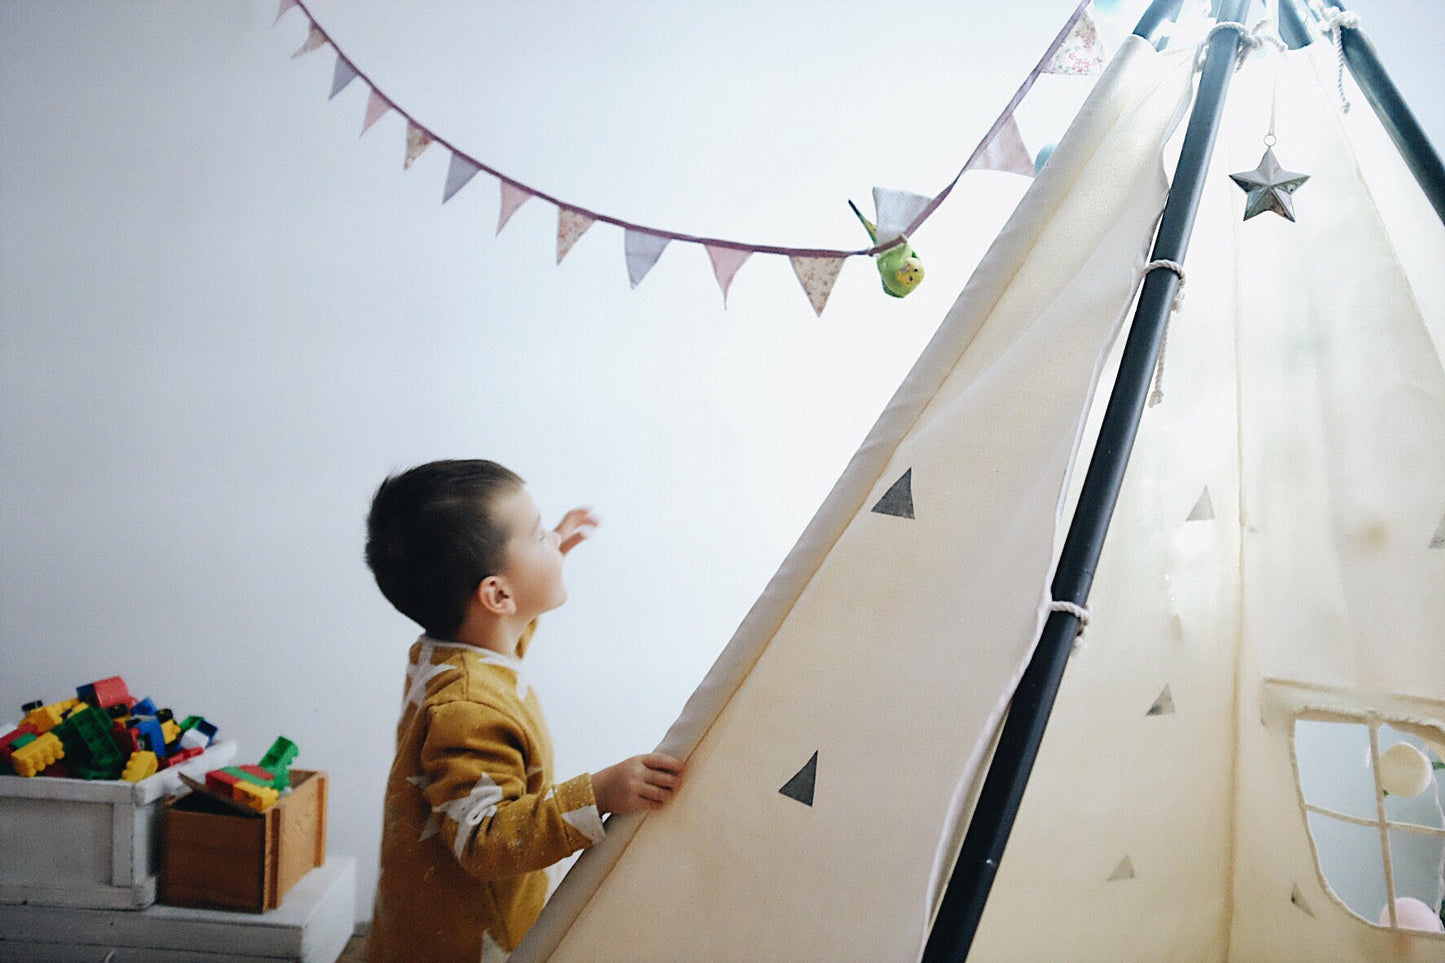 Gray Open Playhouse, Play houses, Play houses for kids, Play houses for children, Canvas tepee,canvas tent, canvas teepee tent, teepee tent